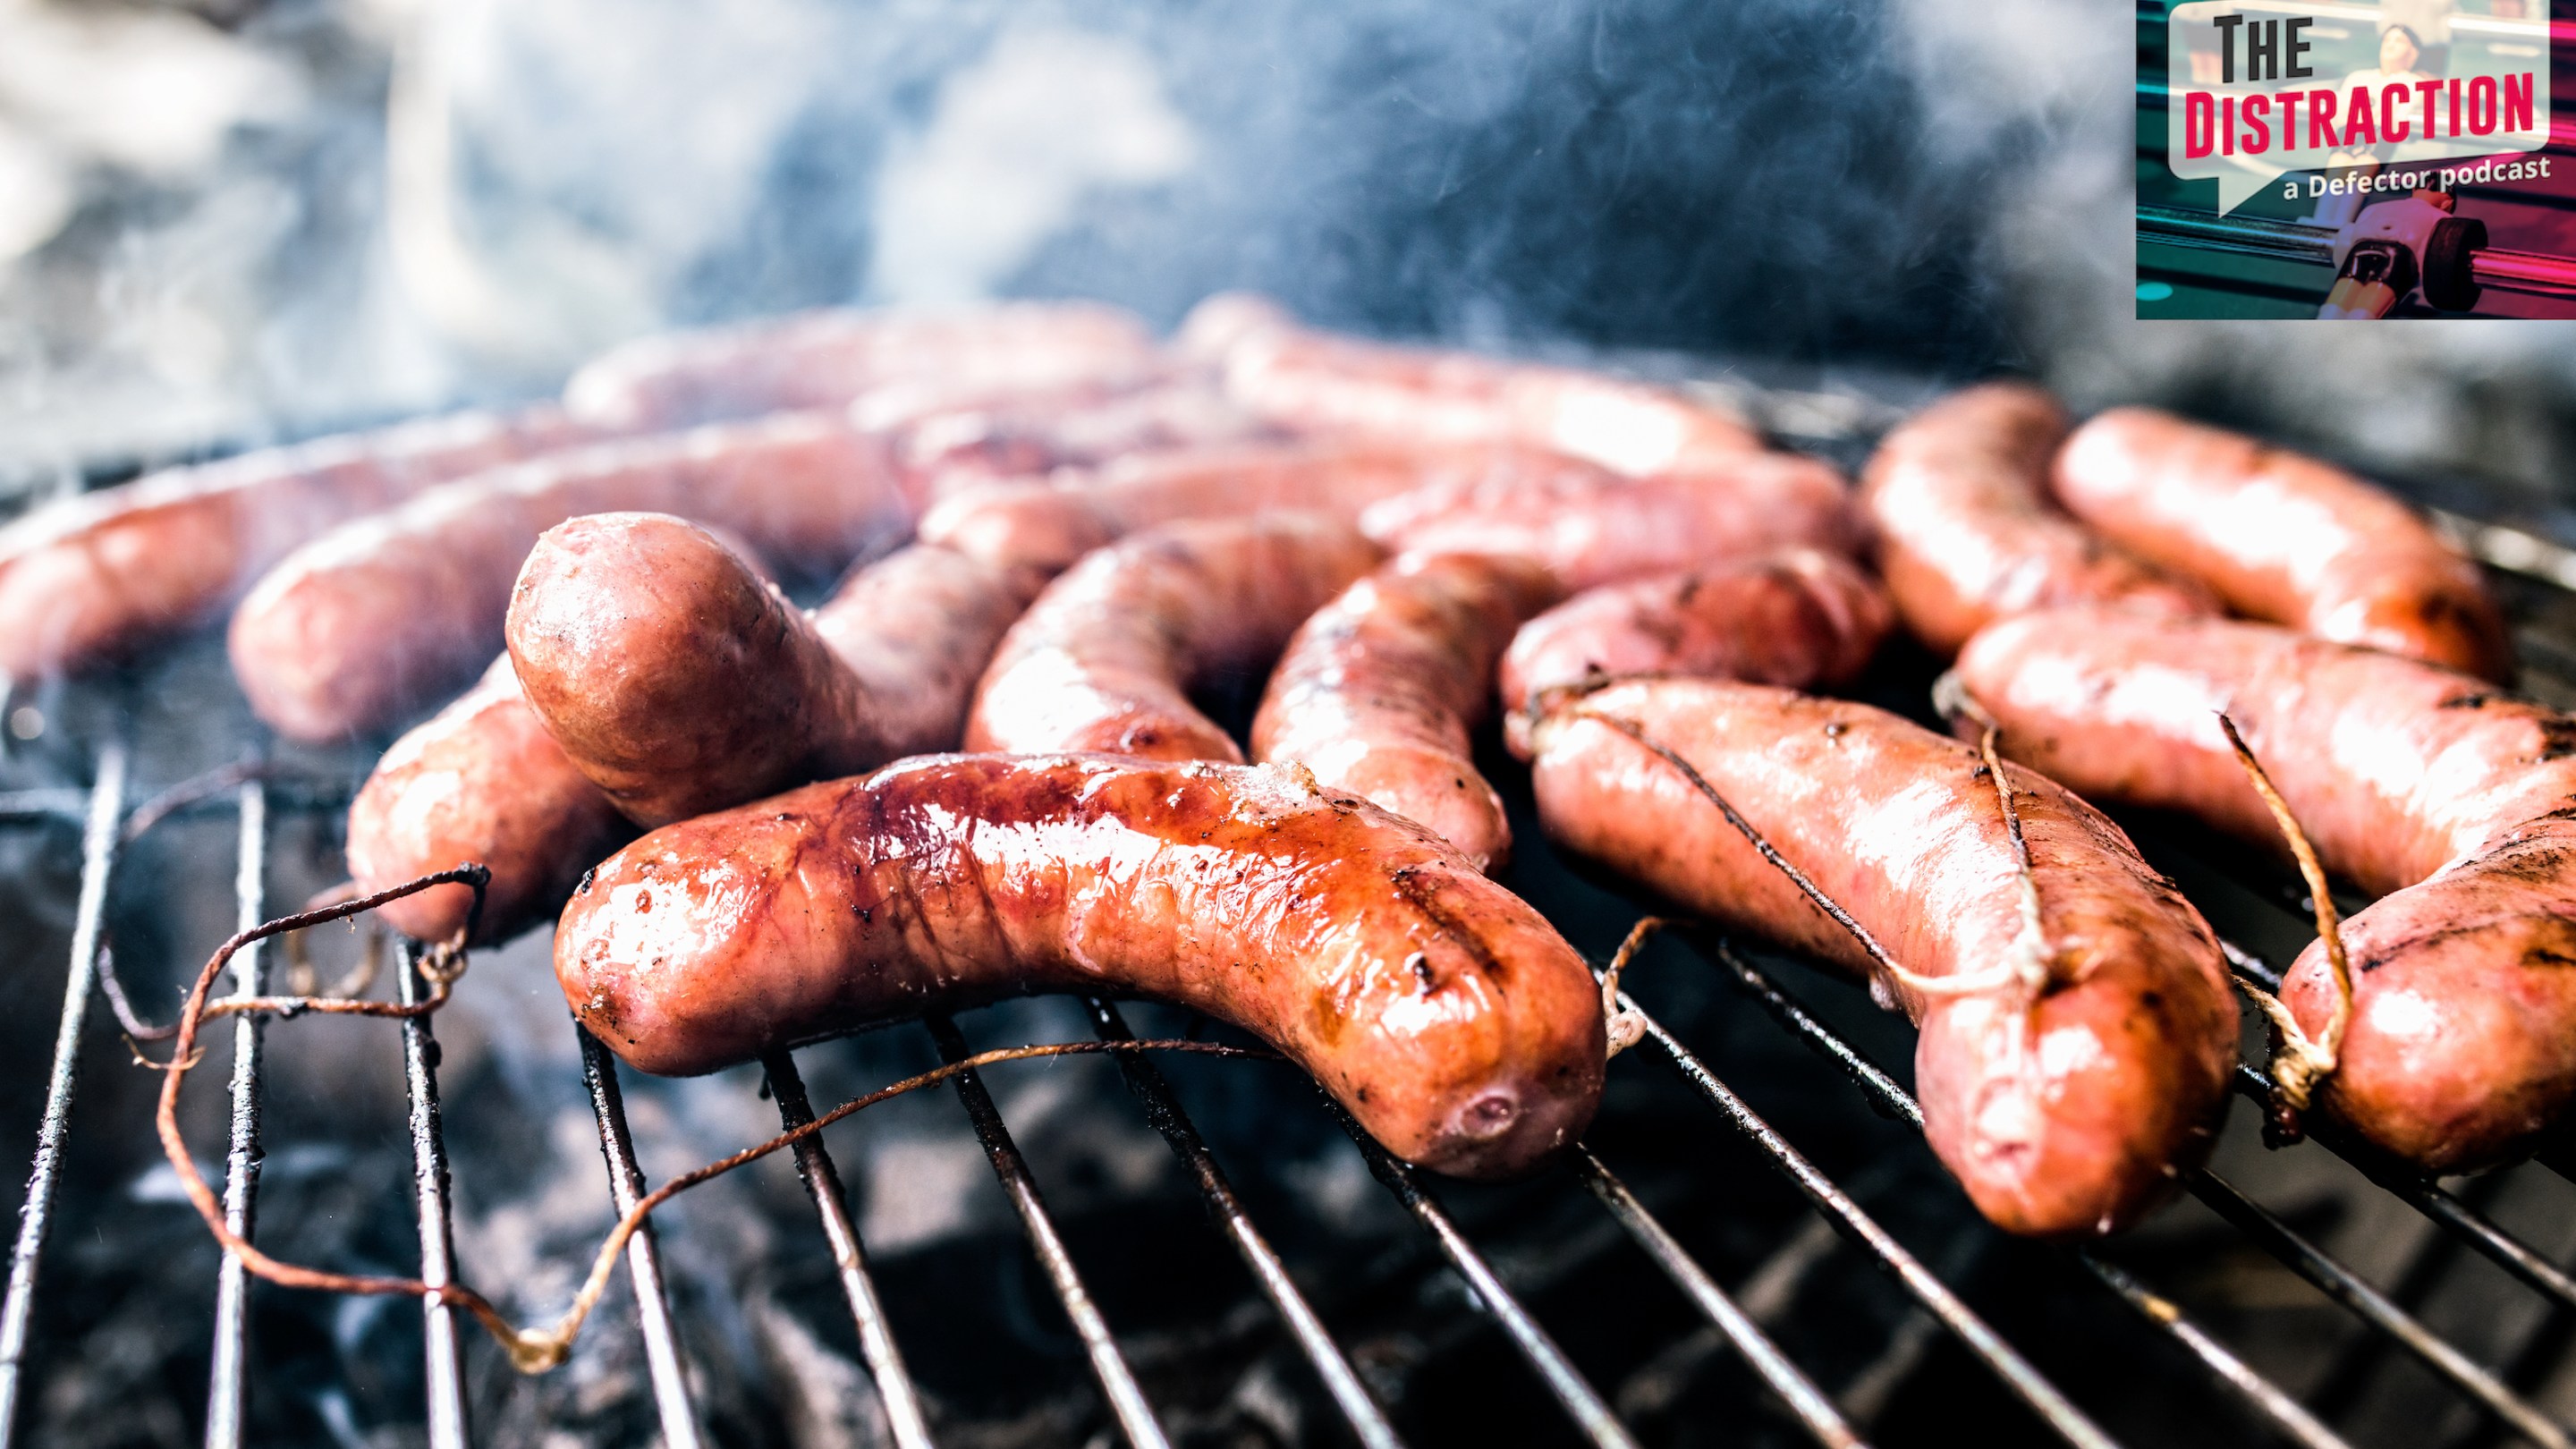 A stock photo of sausages cooking on a barbecue grill.